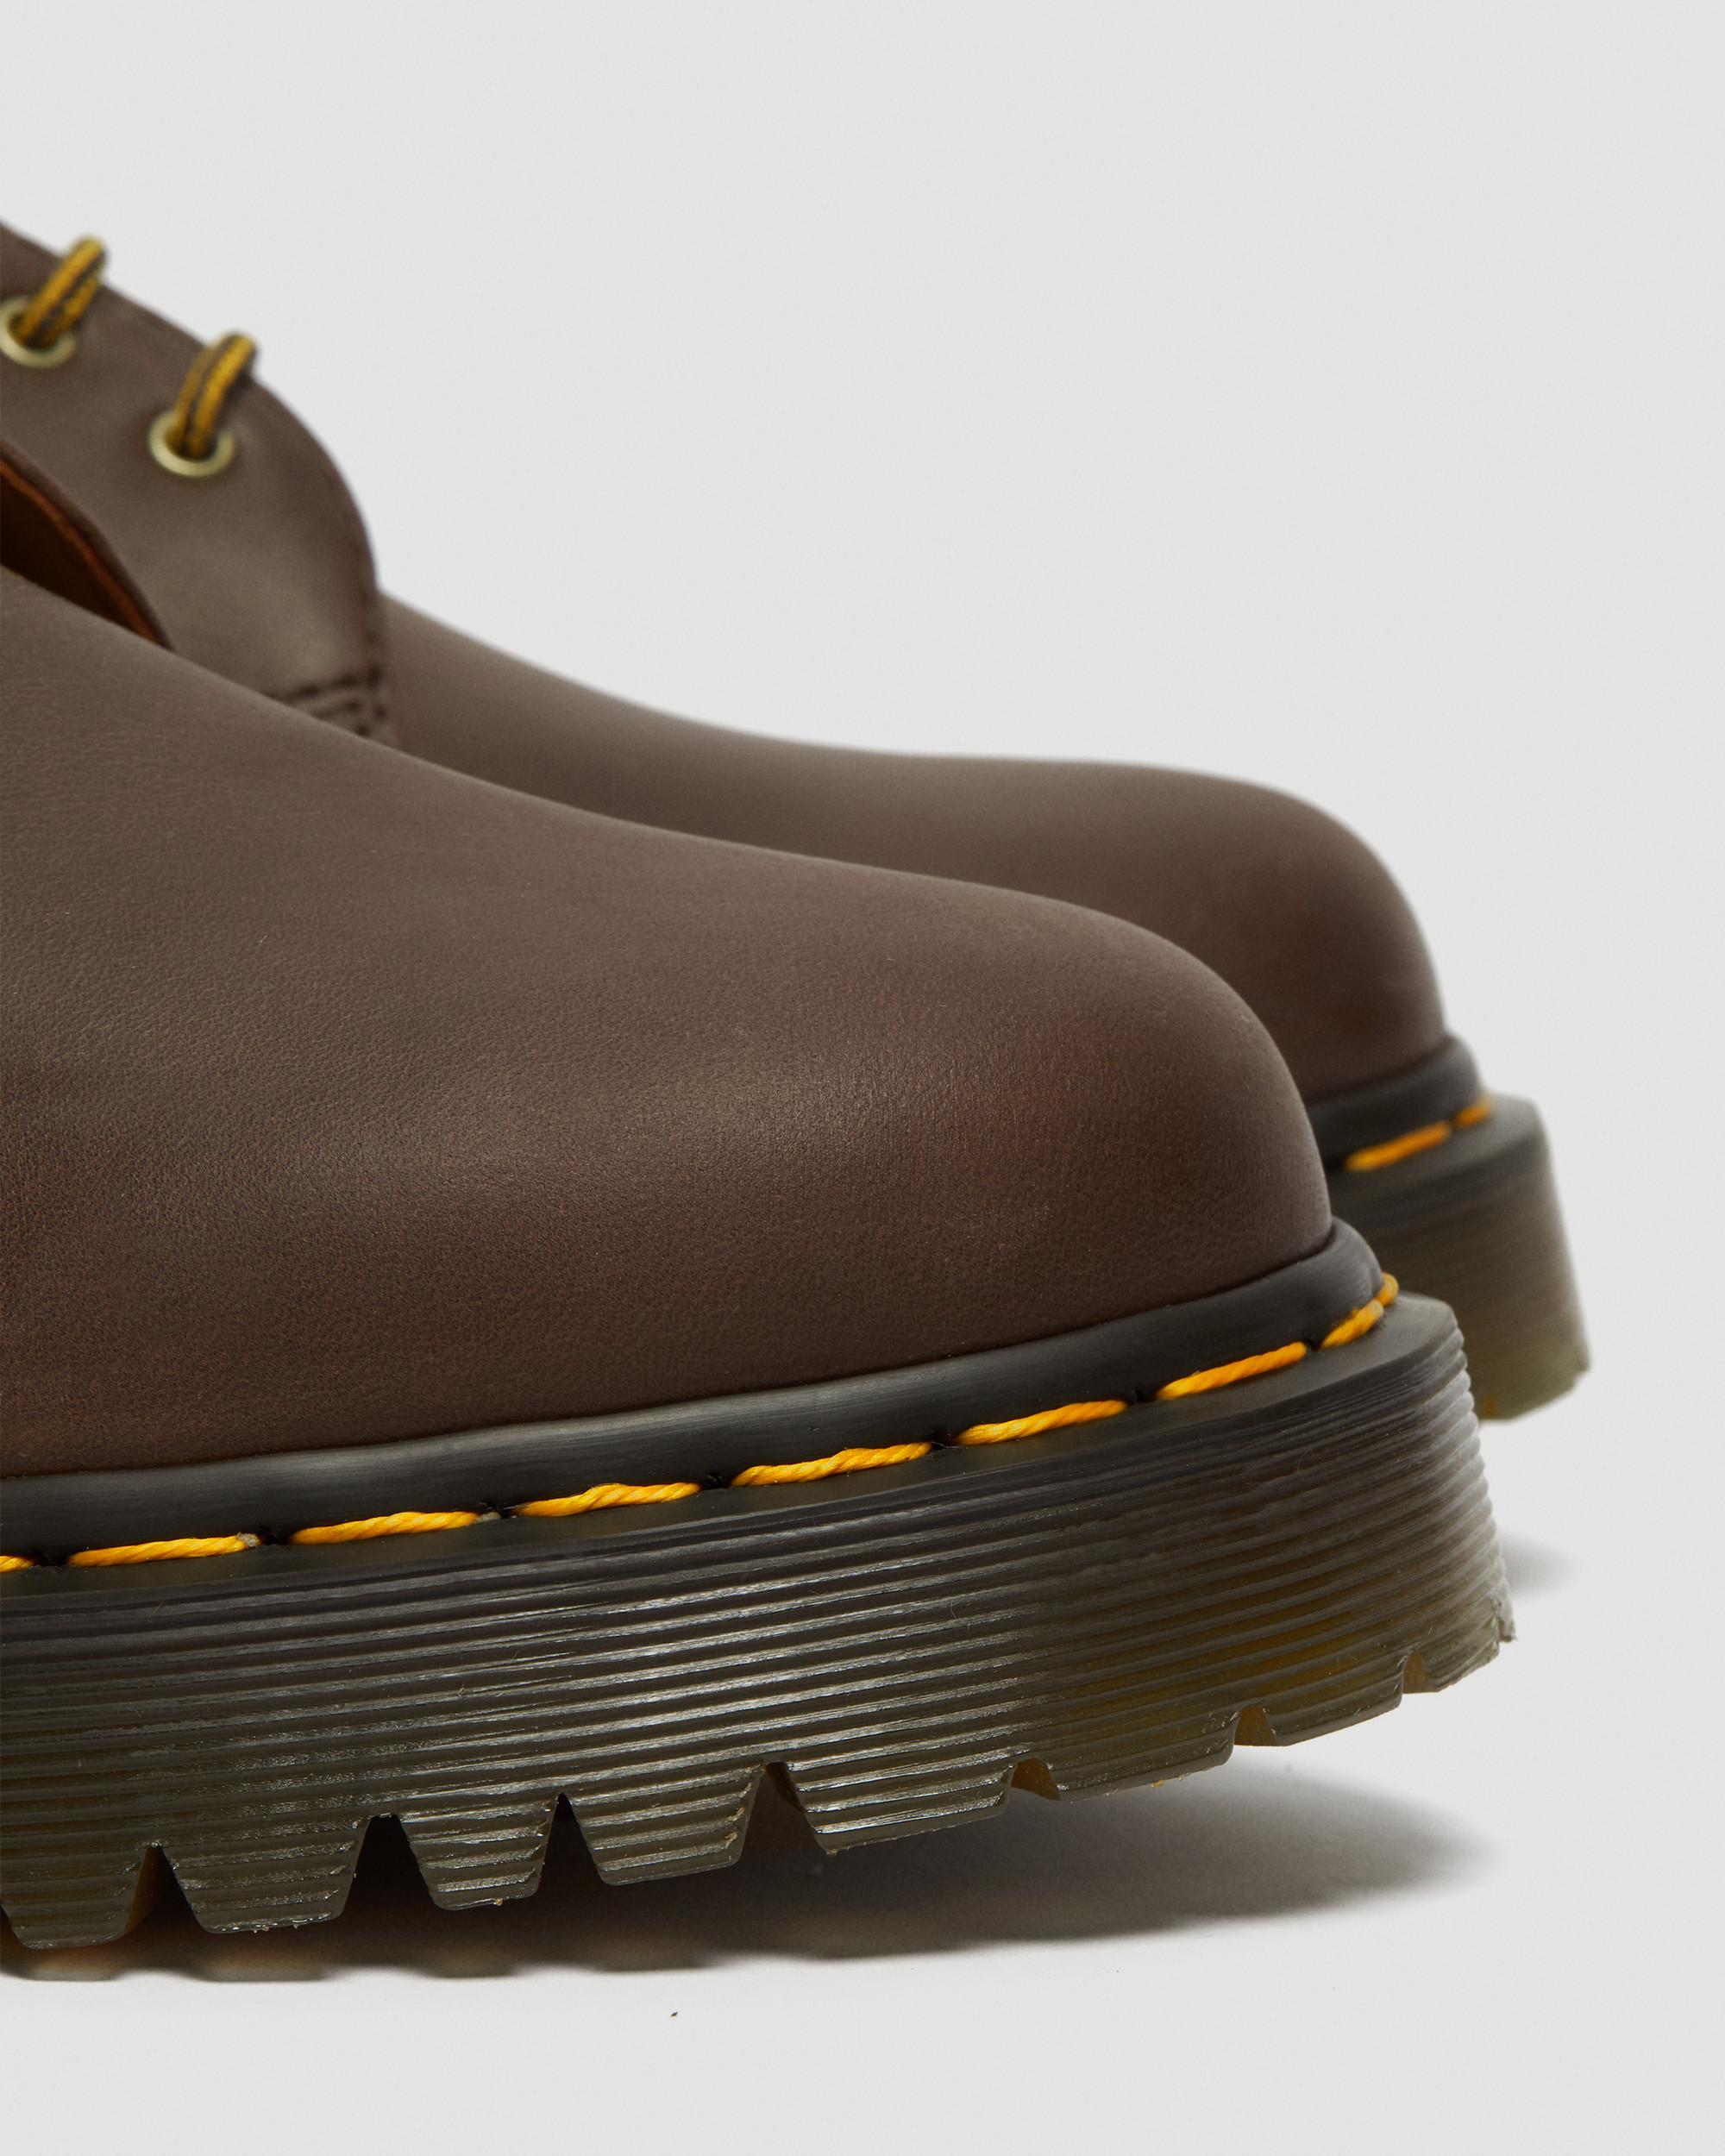 DR MARTENS 1461 Bex Crazy Horse Leather Oxford Shoes